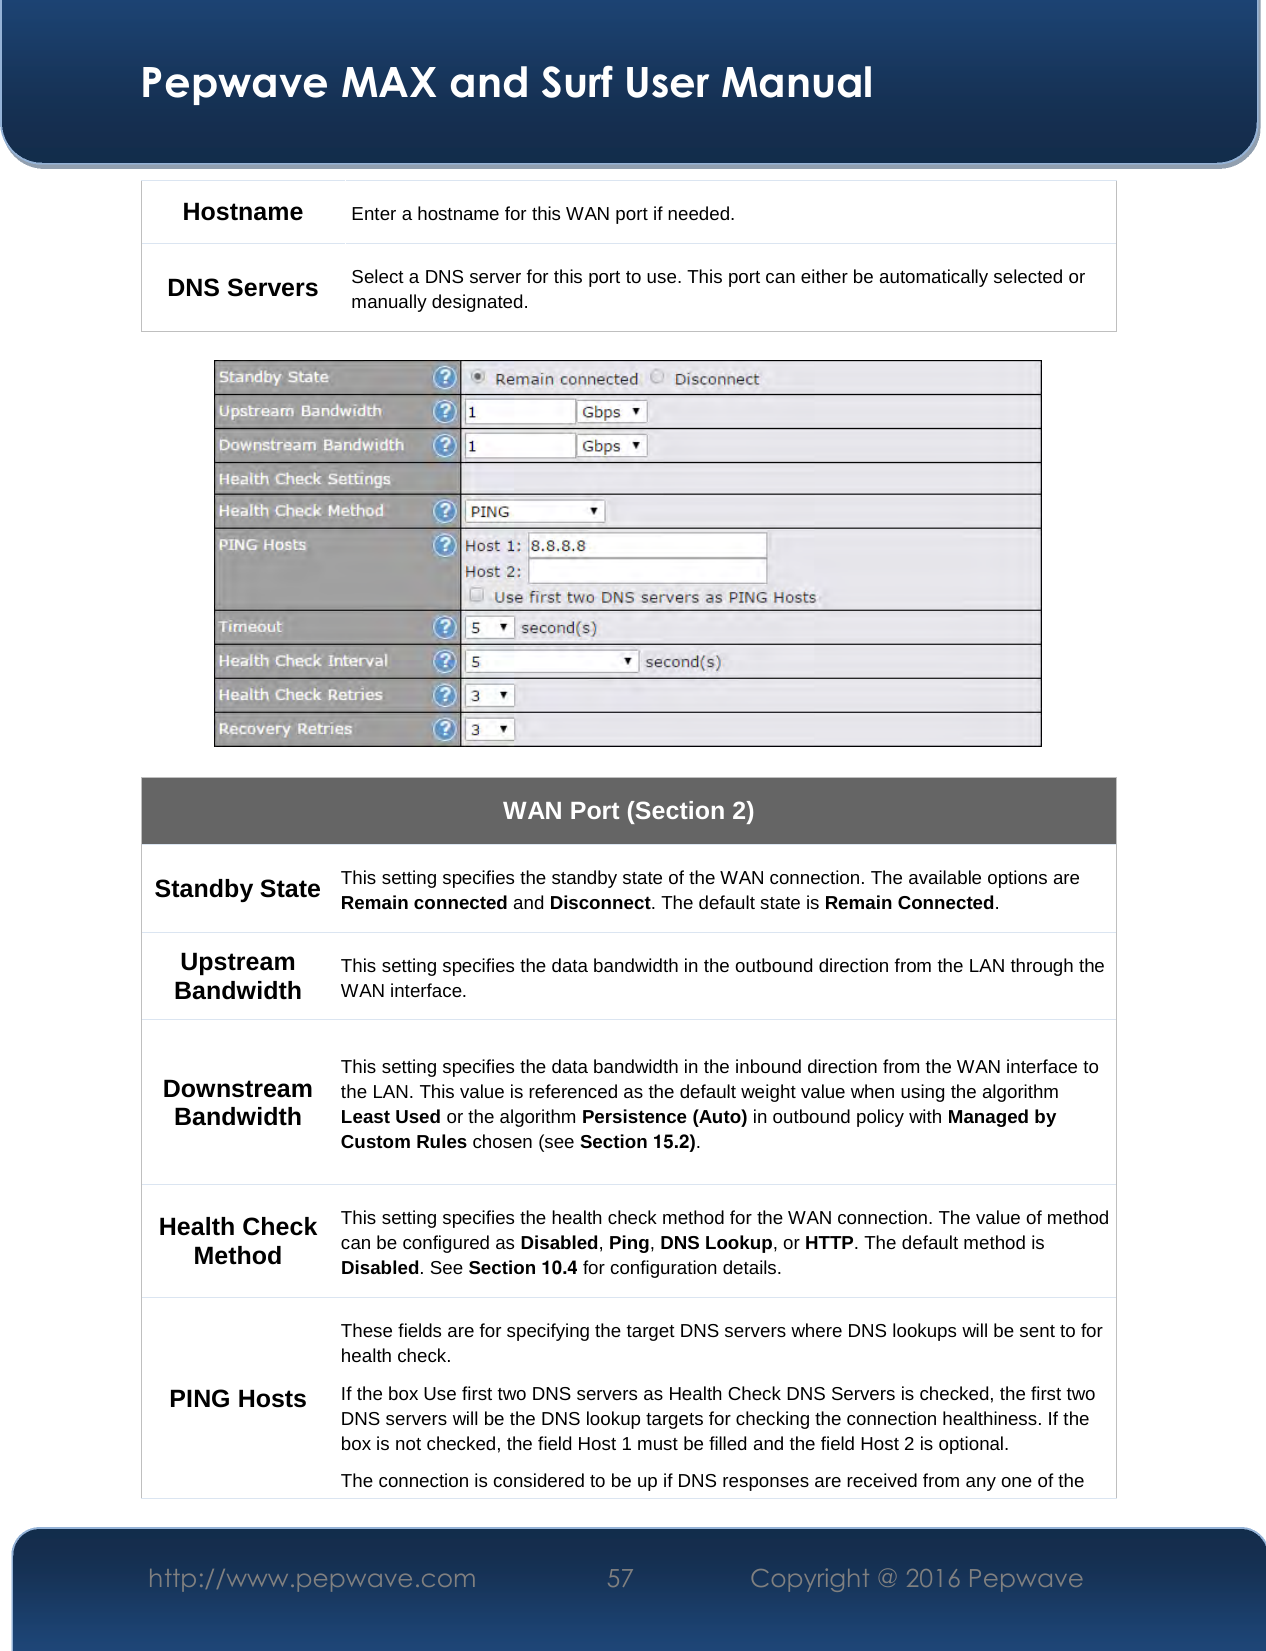  Pepwave MAX and Surf User Manual http://www.pepwave.com  57    Copyright @ 2016 Pepwave   Hostname   Enter a hostname for this WAN port if needed. DNS Servers  Select a DNS server for this port to use. This port can either be automatically selected or manually designated.    WAN Port (Section 2) Standby State This setting specifies the standby state of the WAN connection. The available options are Remain connected and Disconnect. The default state is Remain Connected. Upstream Bandwidth This setting specifies the data bandwidth in the outbound direction from the LAN through the WAN interface. Downstream Bandwidth This setting specifies the data bandwidth in the inbound direction from the WAN interface to the LAN. This value is referenced as the default weight value when using the algorithm Least Used or the algorithm Persistence (Auto) in outbound policy with Managed by Custom Rules chosen (see Section 15.2). Health Check Method This setting specifies the health check method for the WAN connection. The value of method can be configured as Disabled, Ping, DNS Lookup, or HTTP. The default method is Disabled. See Section 10.4 for configuration details. PING Hosts These fields are for specifying the target DNS servers where DNS lookups will be sent to for health check. If the box Use first two DNS servers as Health Check DNS Servers is checked, the first two DNS servers will be the DNS lookup targets for checking the connection healthiness. If the box is not checked, the field Host 1 must be filled and the field Host 2 is optional. The connection is considered to be up if DNS responses are received from any one of the 